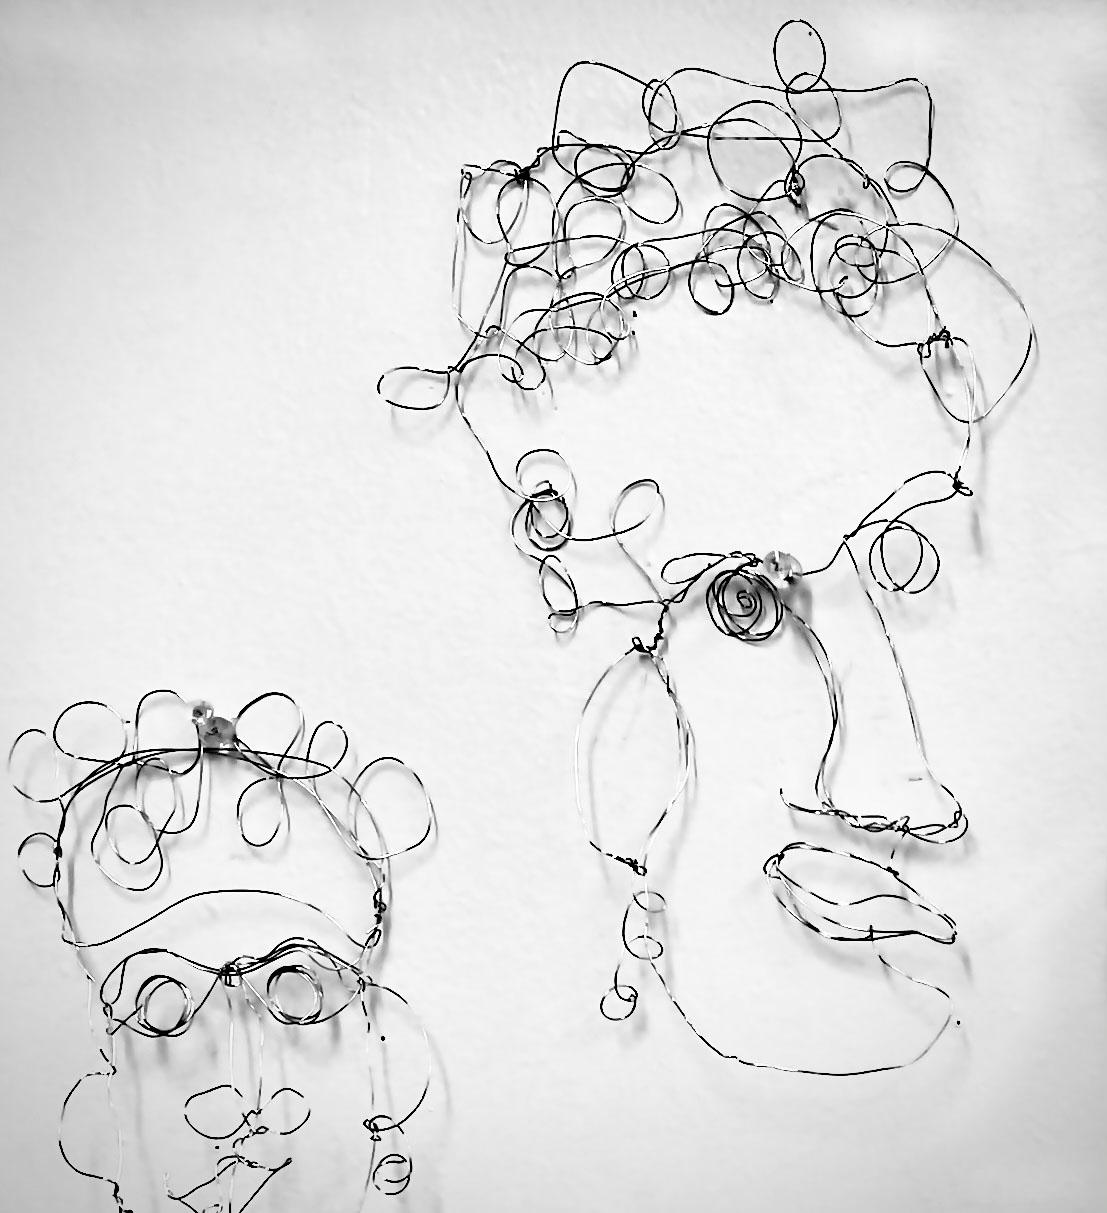 Wire sculpture formed into portrait by Shelly Lowenstein